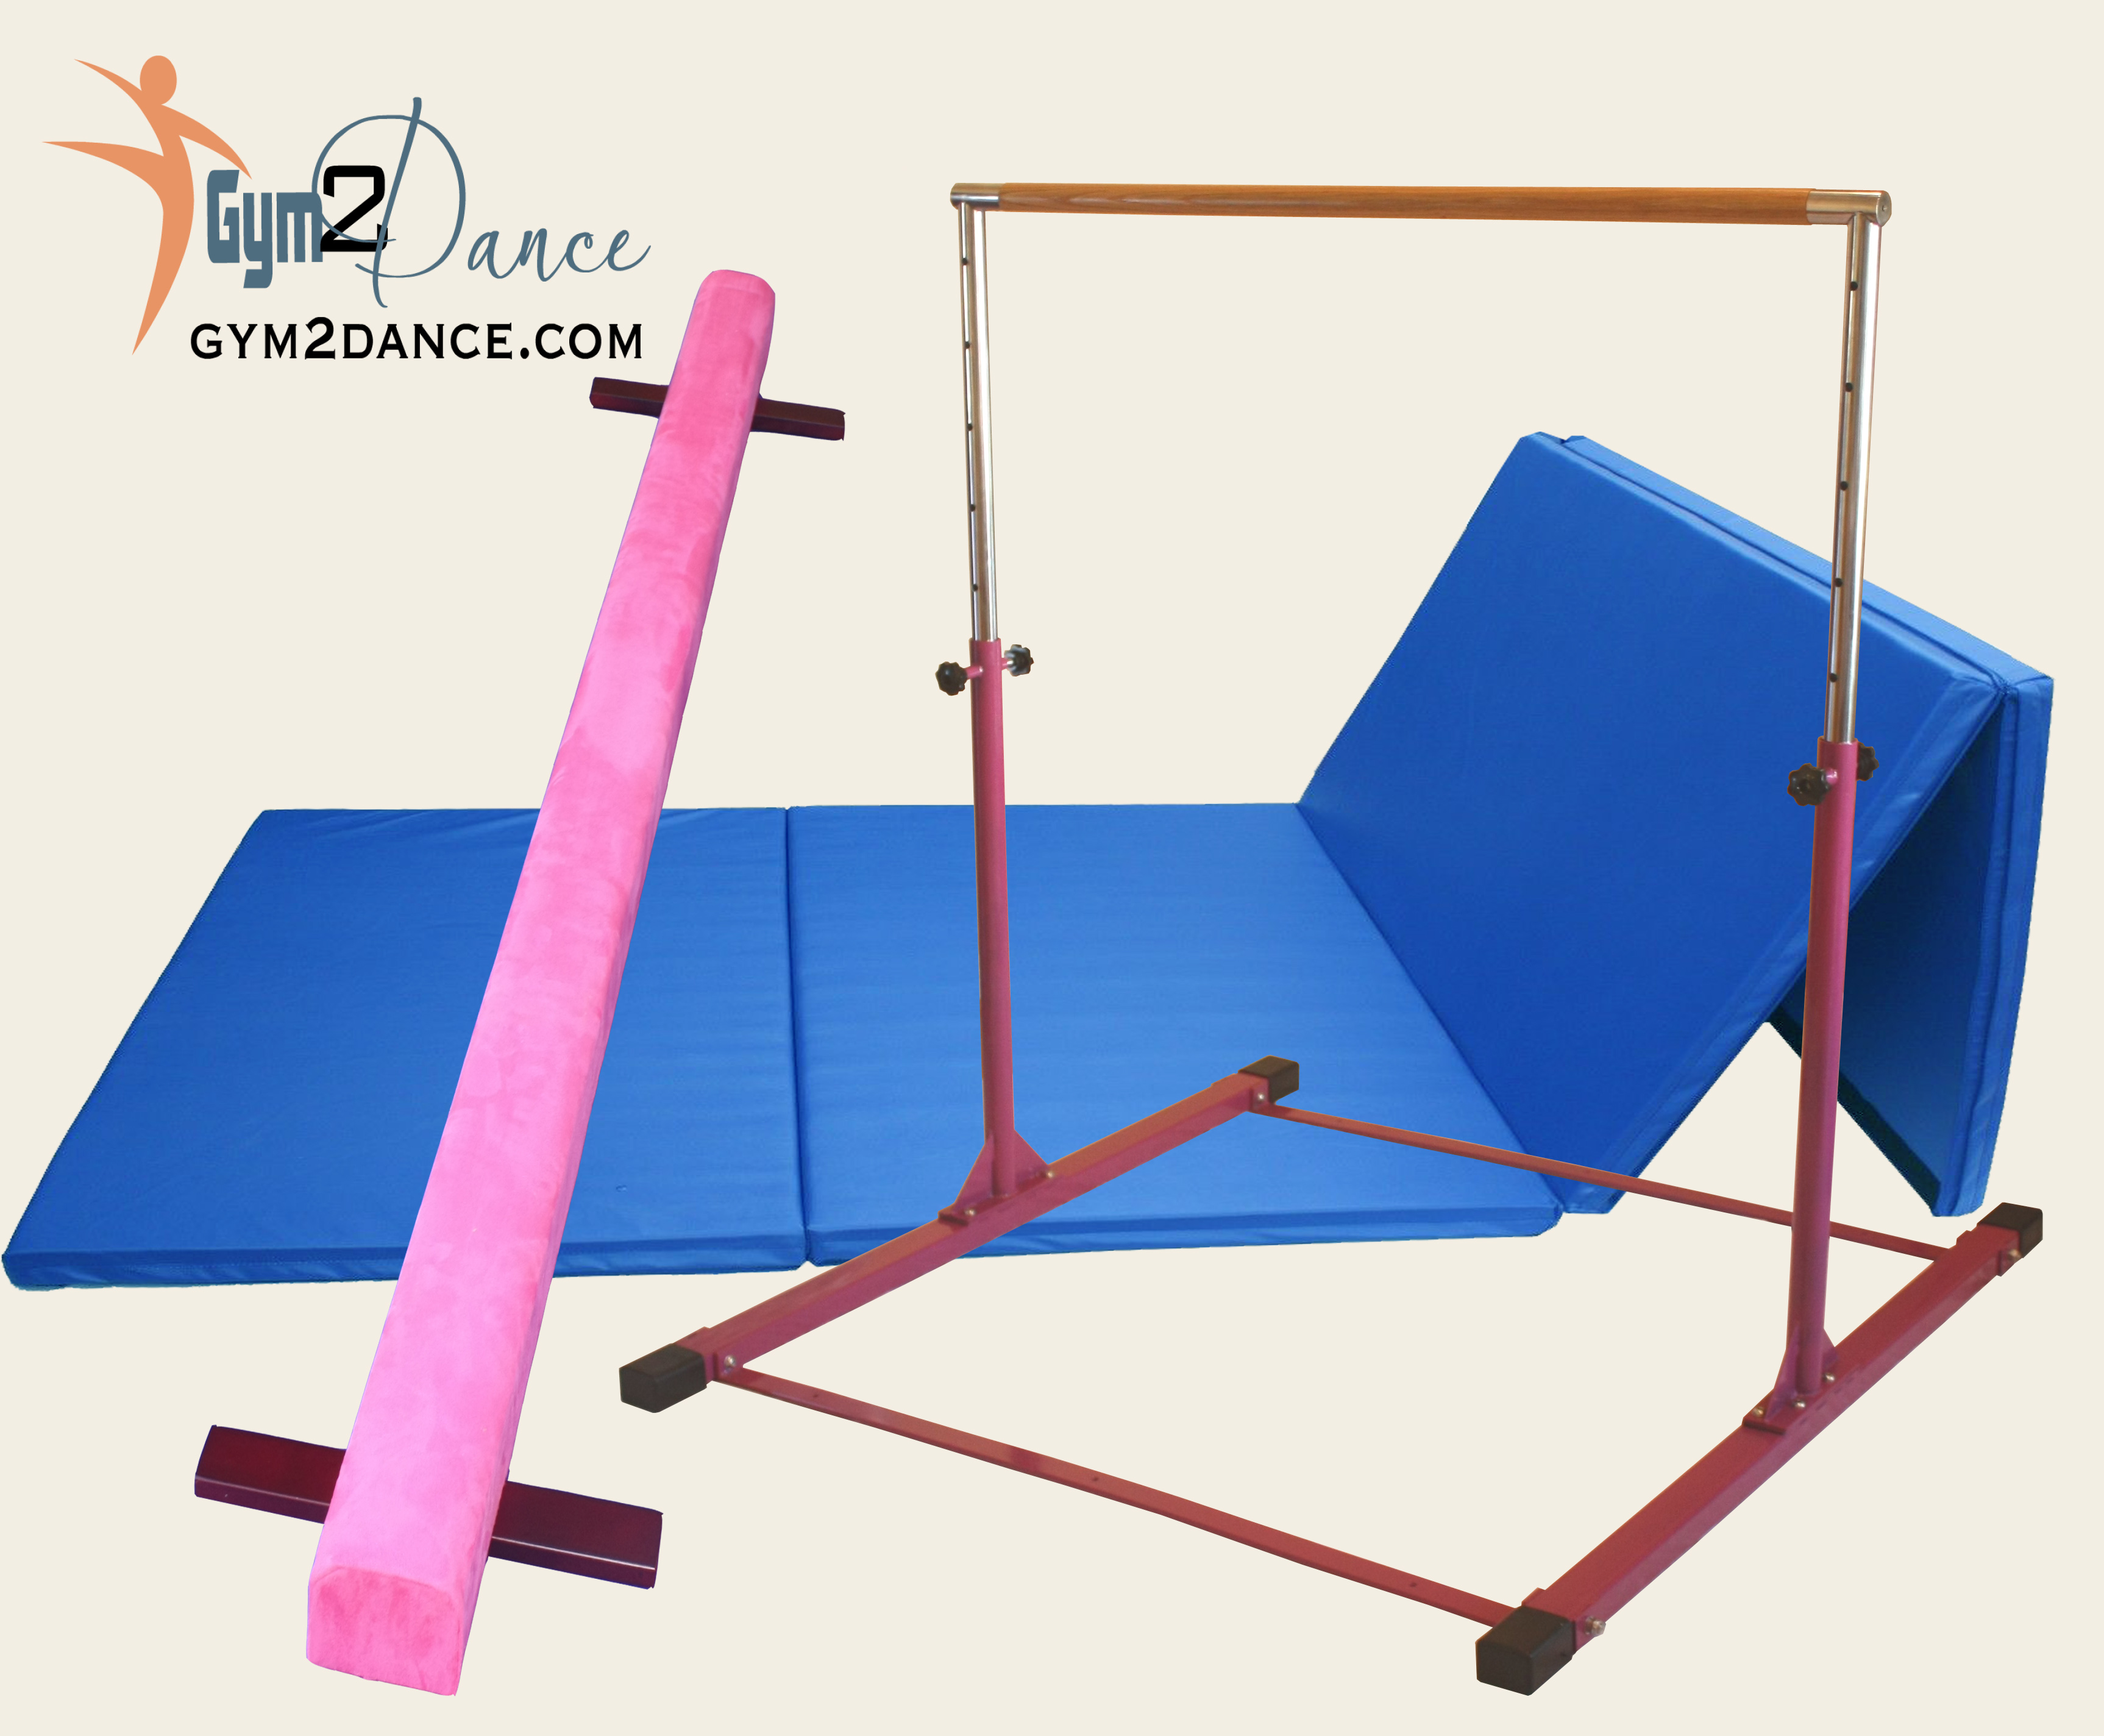 What is Wooden Gym Bar Ballet Bar Gymnastic Equipment Portable